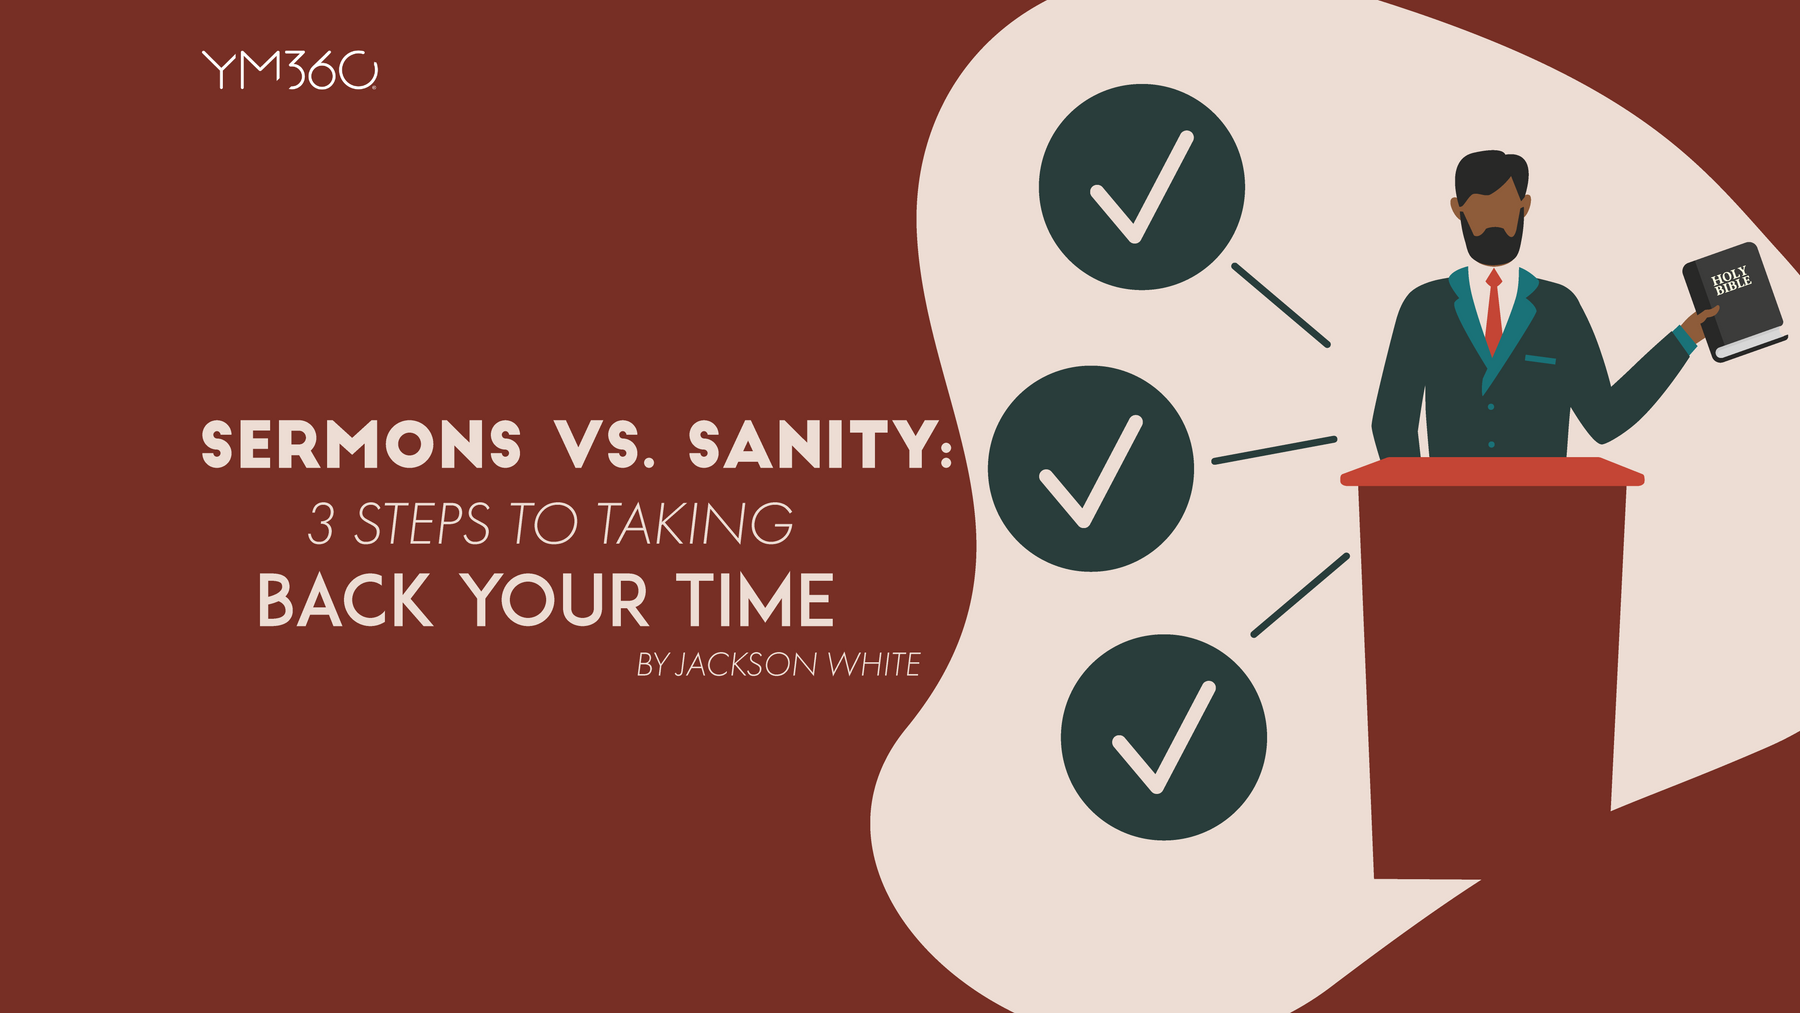 Sermons vs Sanity: 3 Steps to Taking Back Your Time